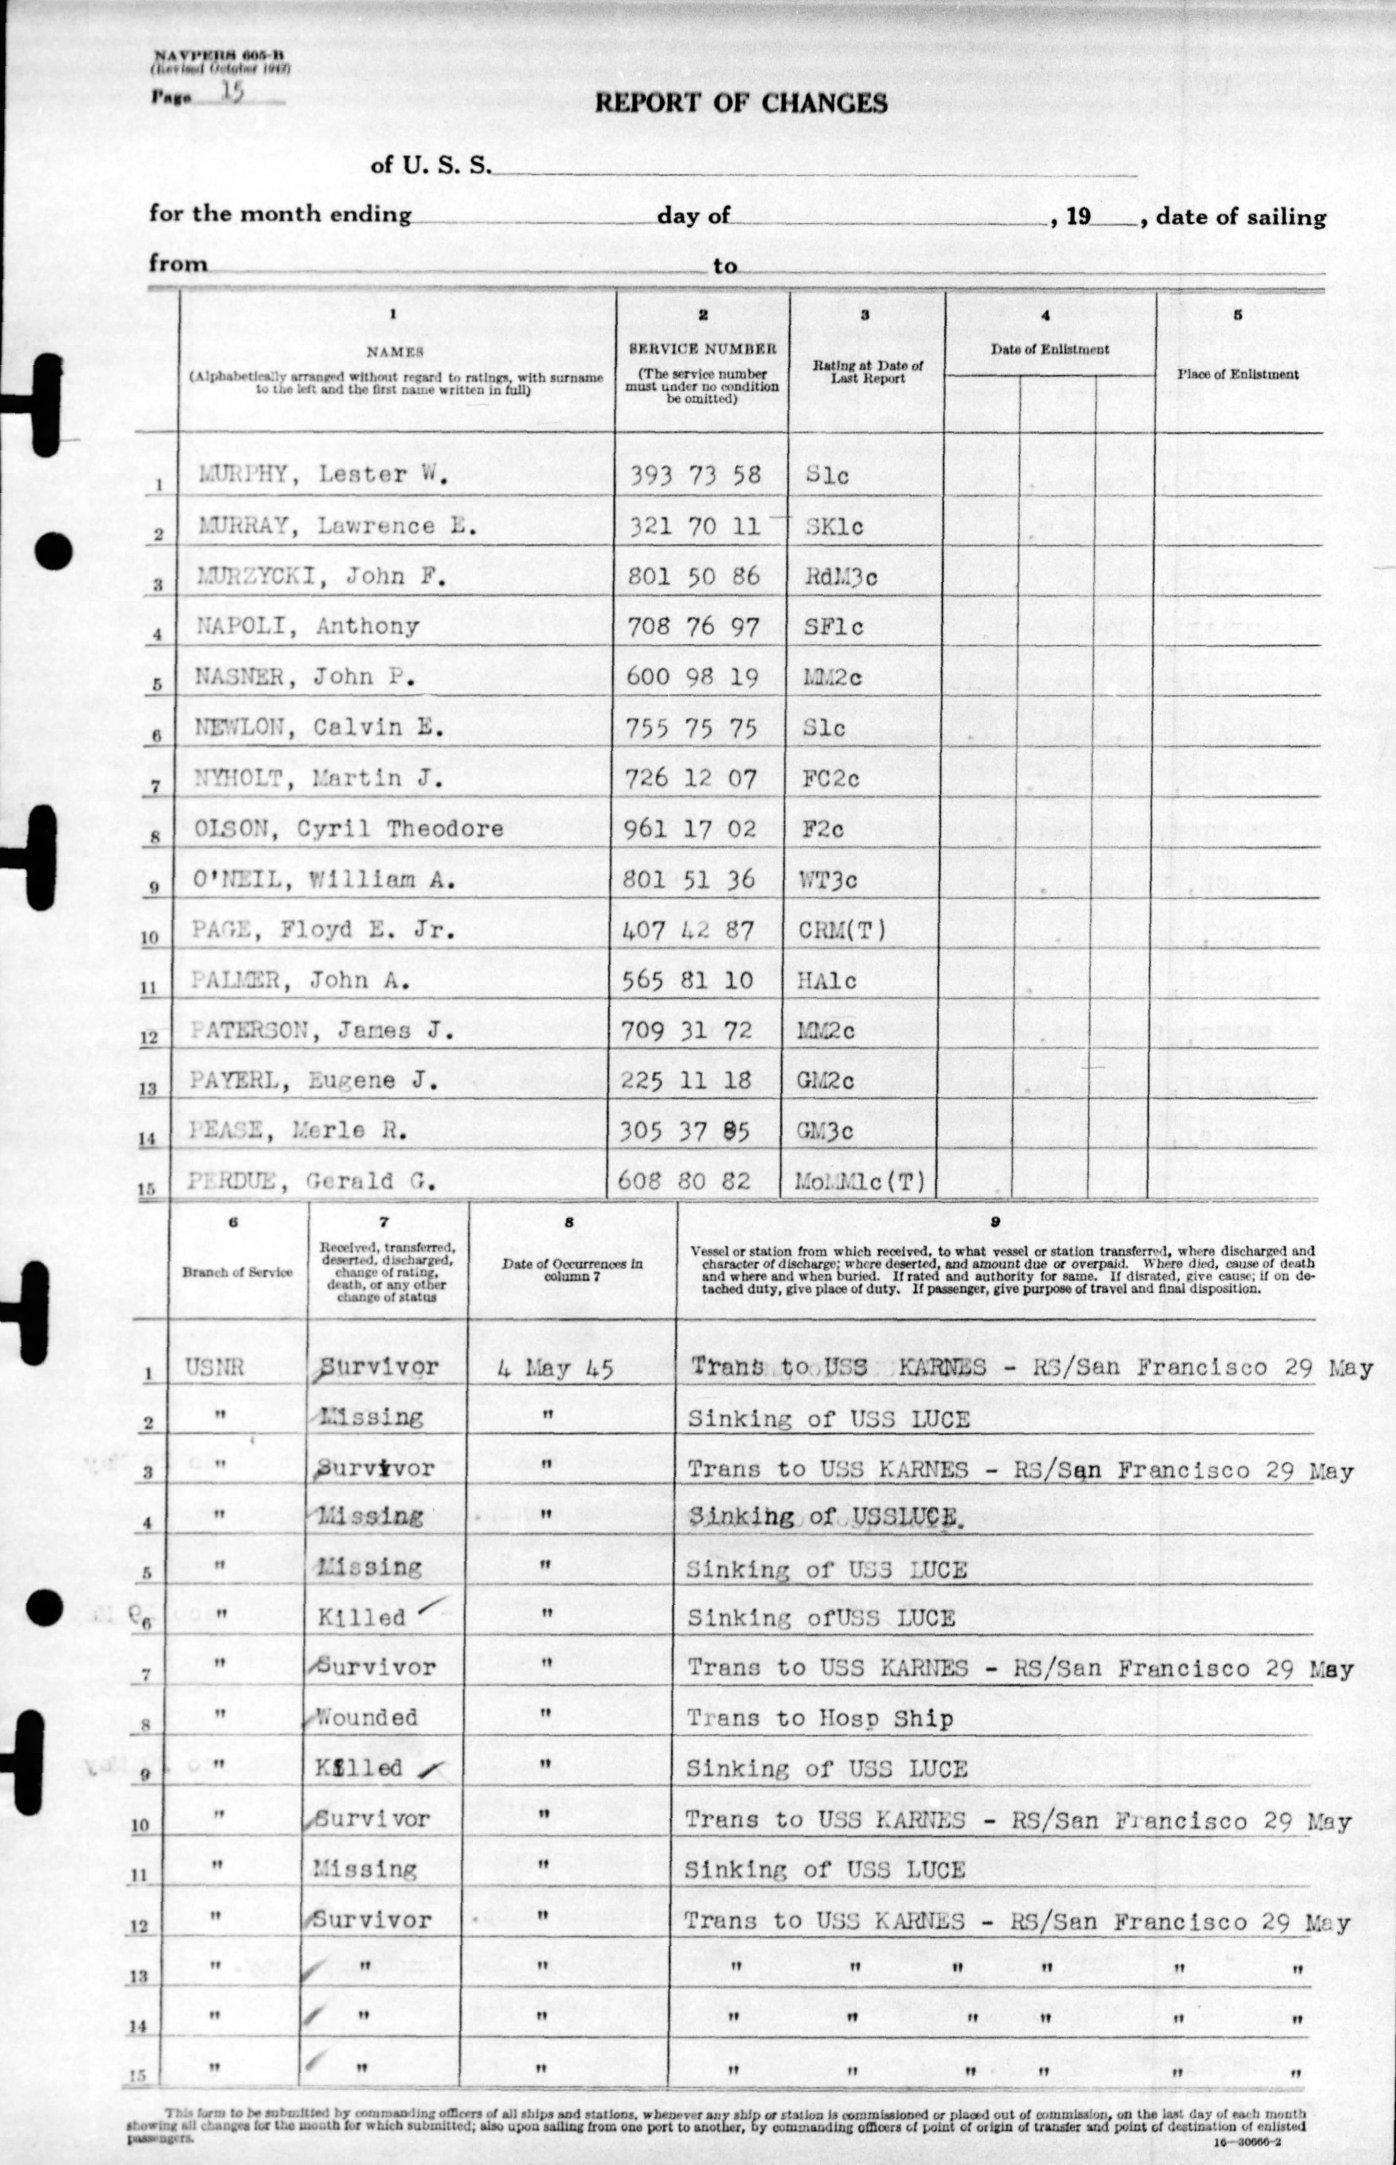 USS Luce final muster list dated June 19, 1945 after the ship was sunk May 4, 1945. Page 17 of 25.